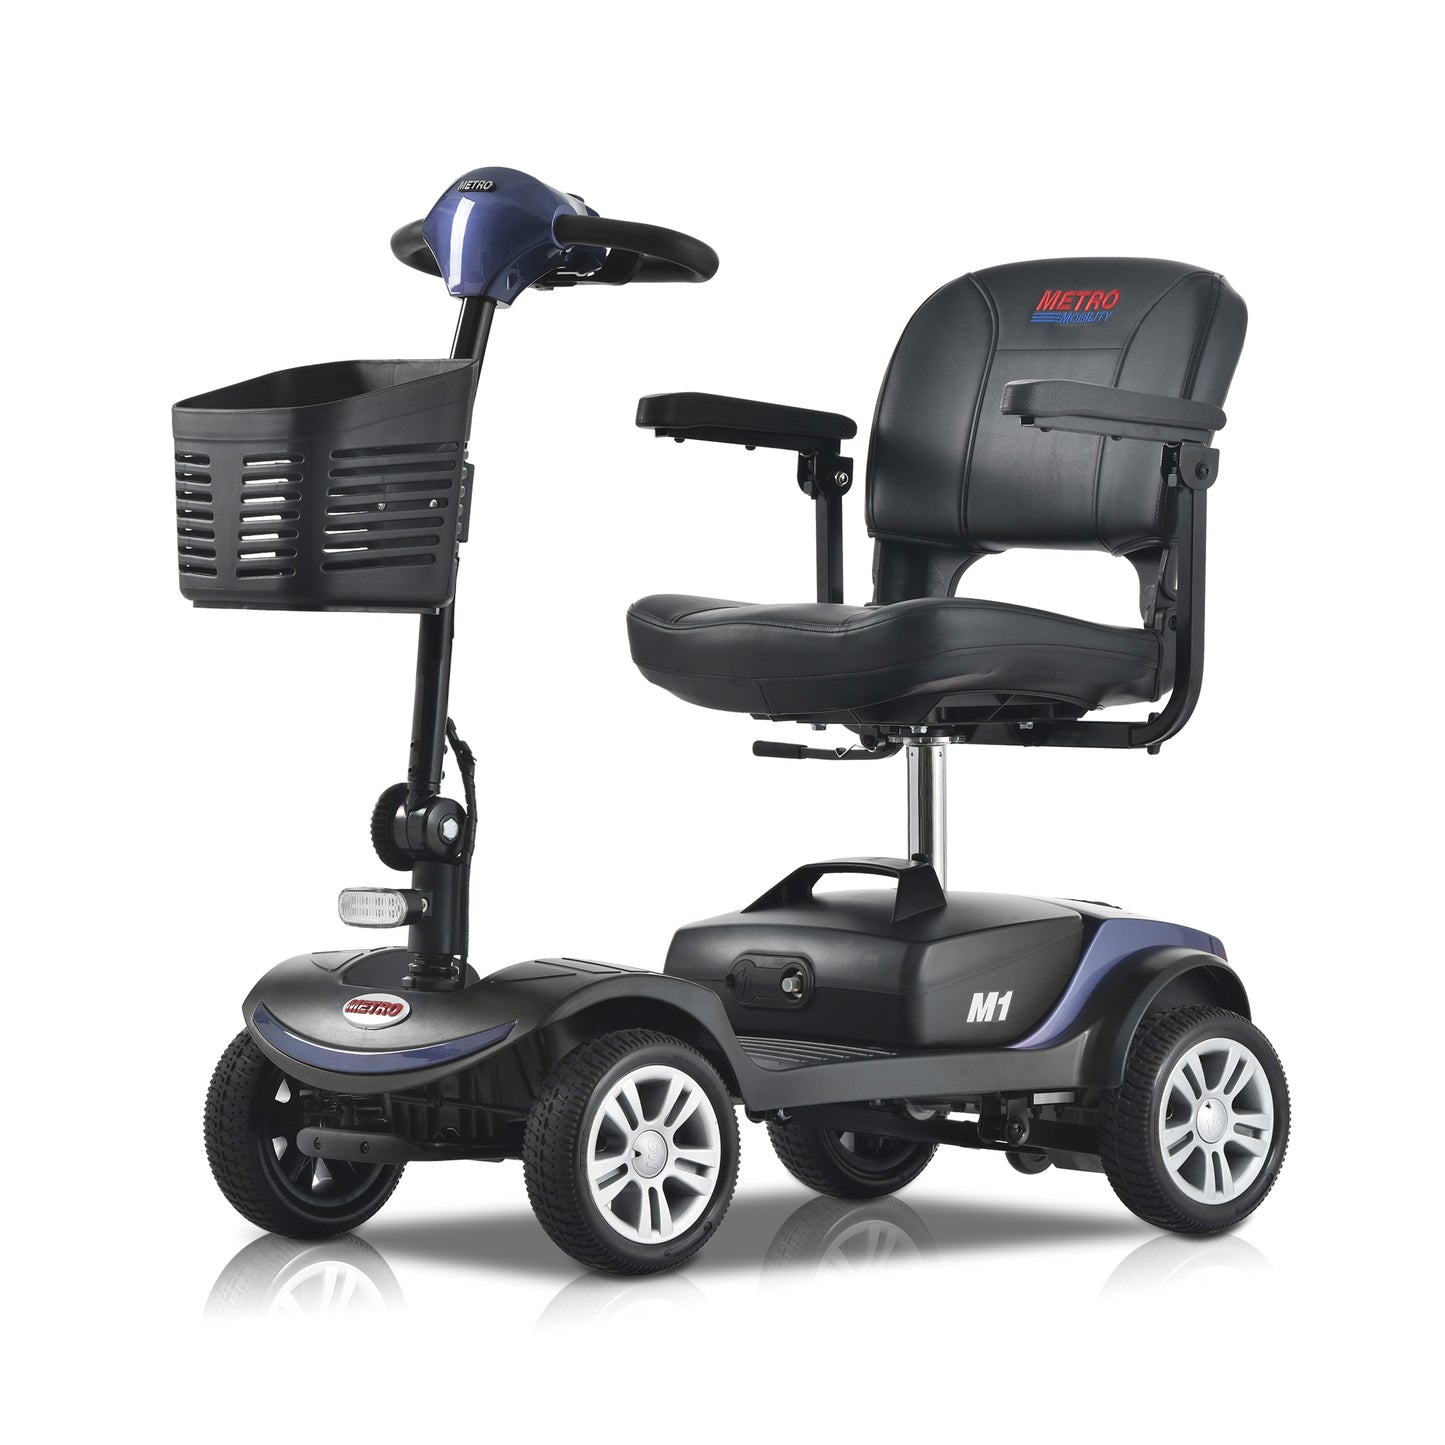 Metro M1 Mobility Scooter - Blue